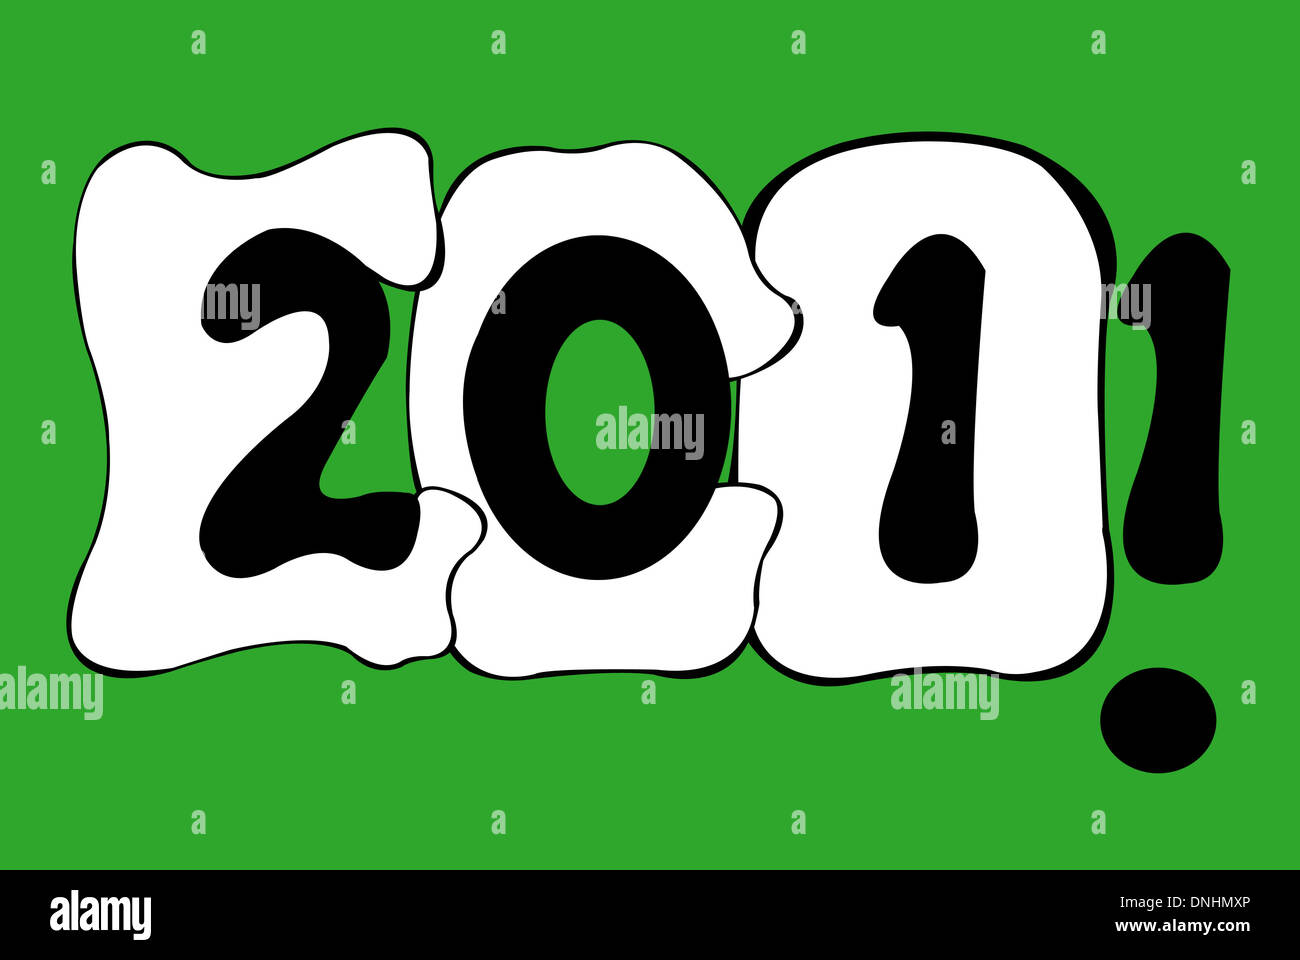 Eco word combined with the year 2011 Stock Photo